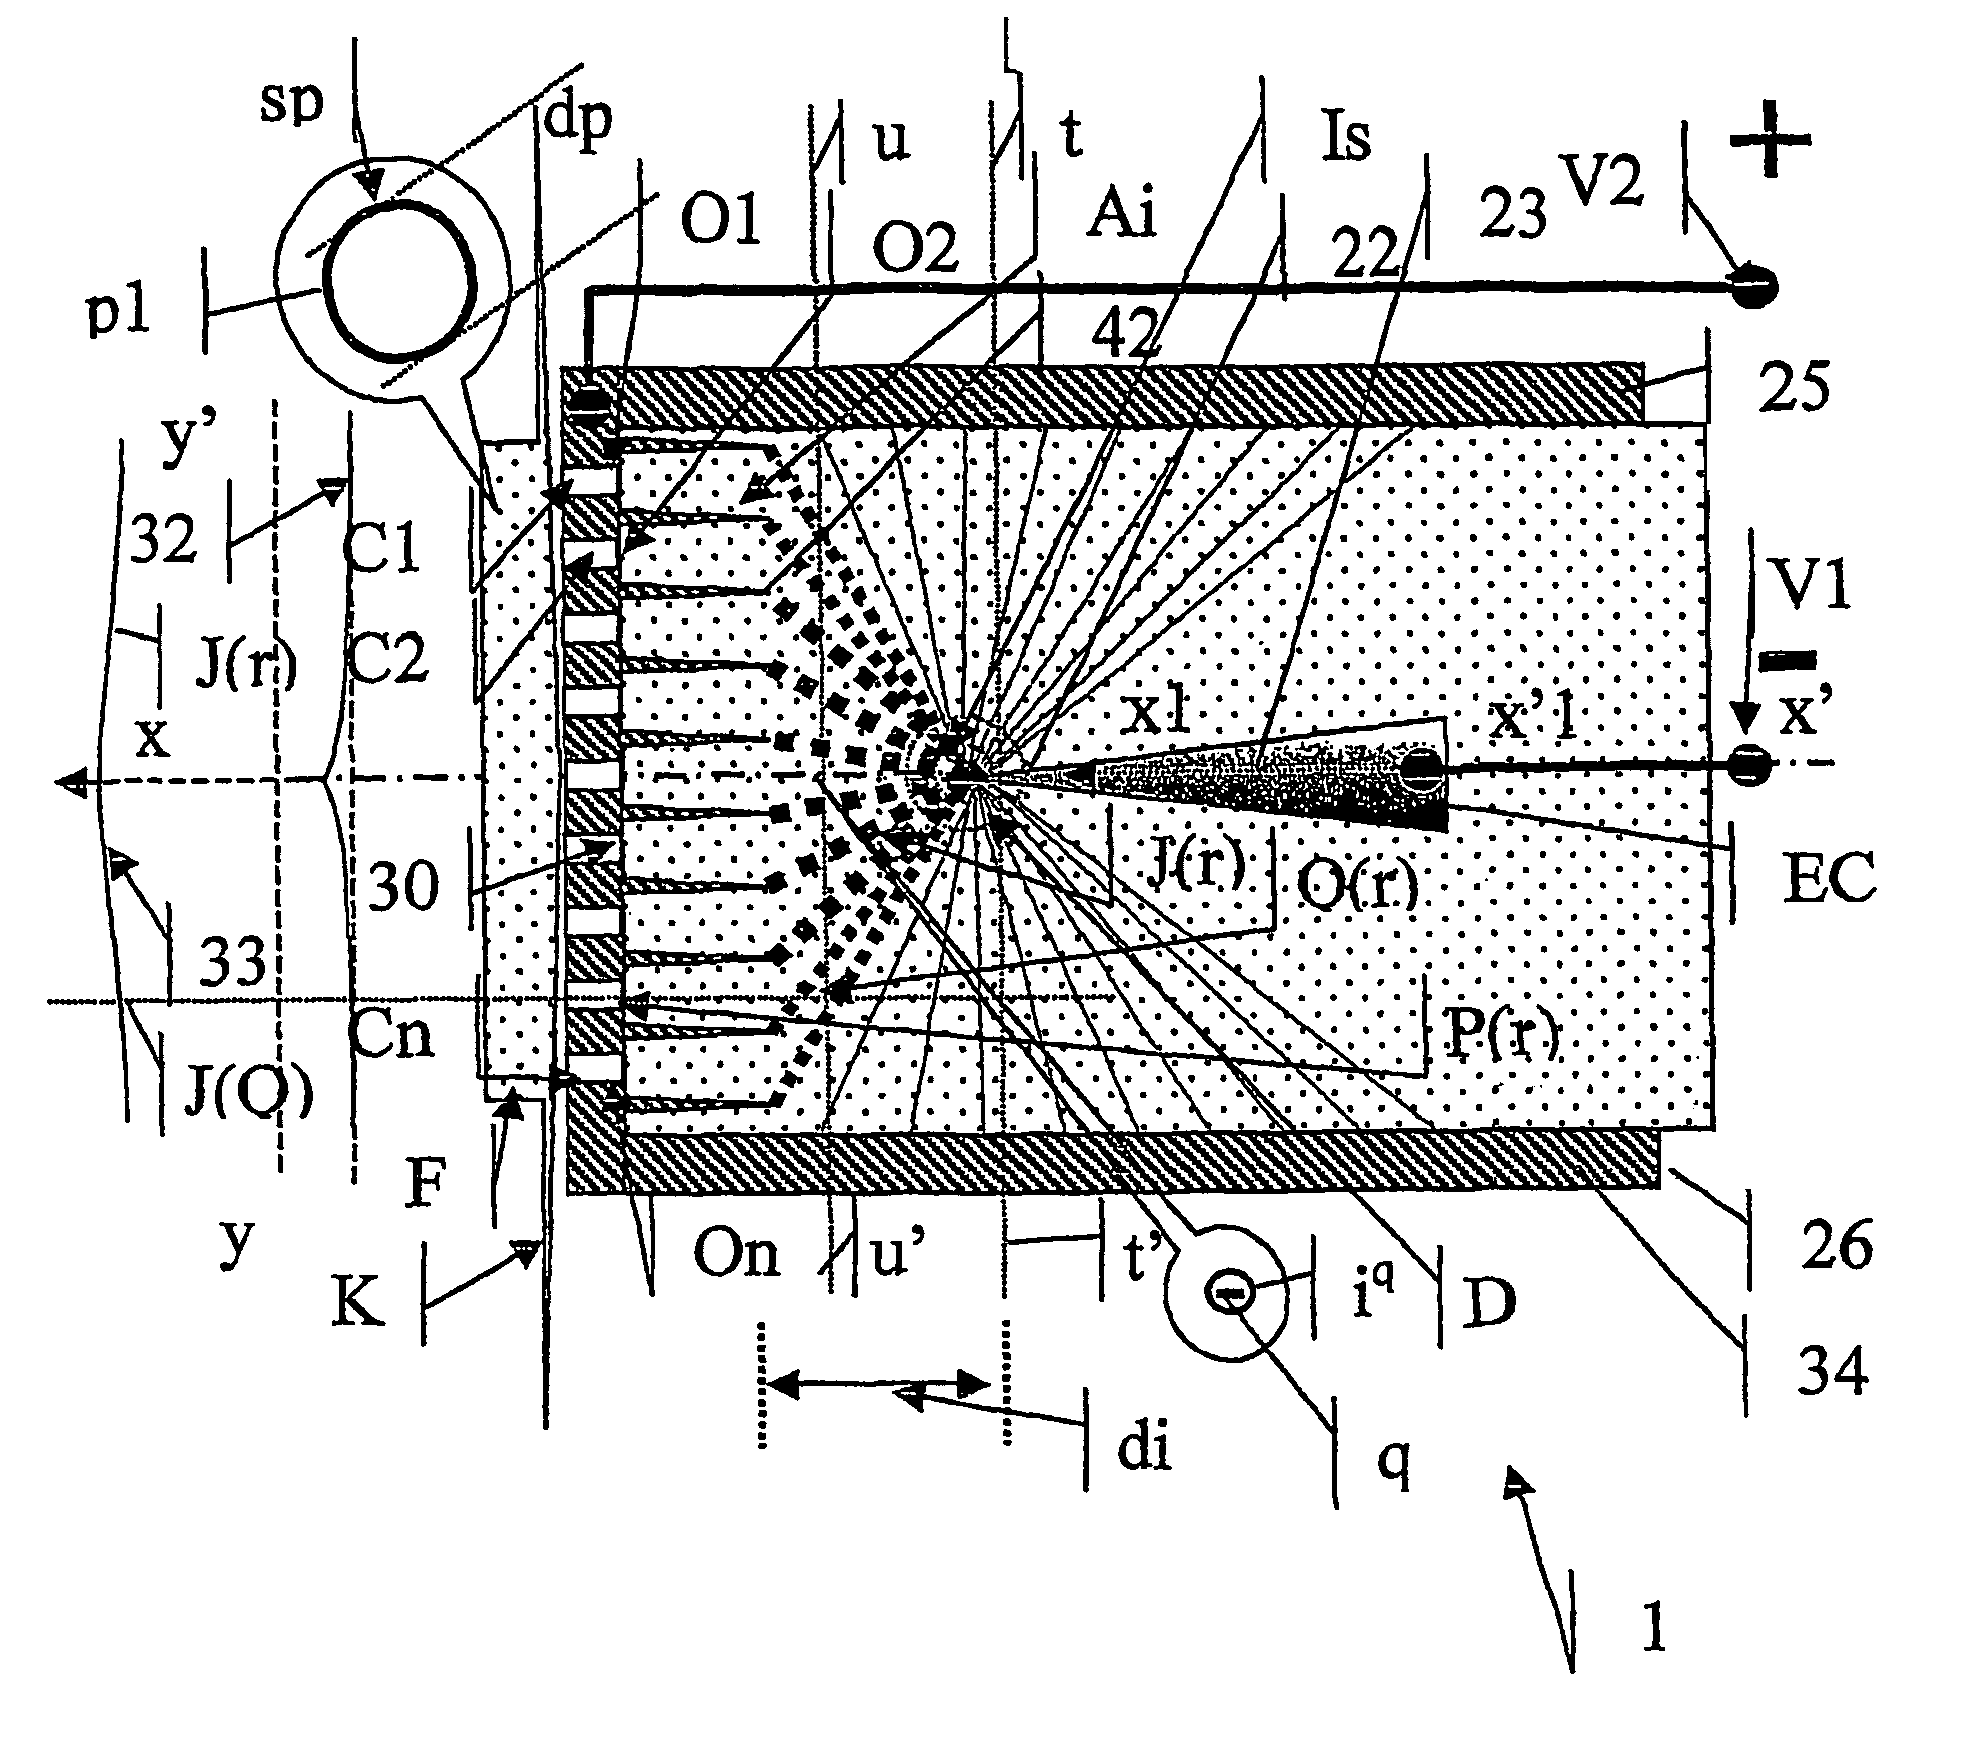 Electrostatic device for ionic air emission